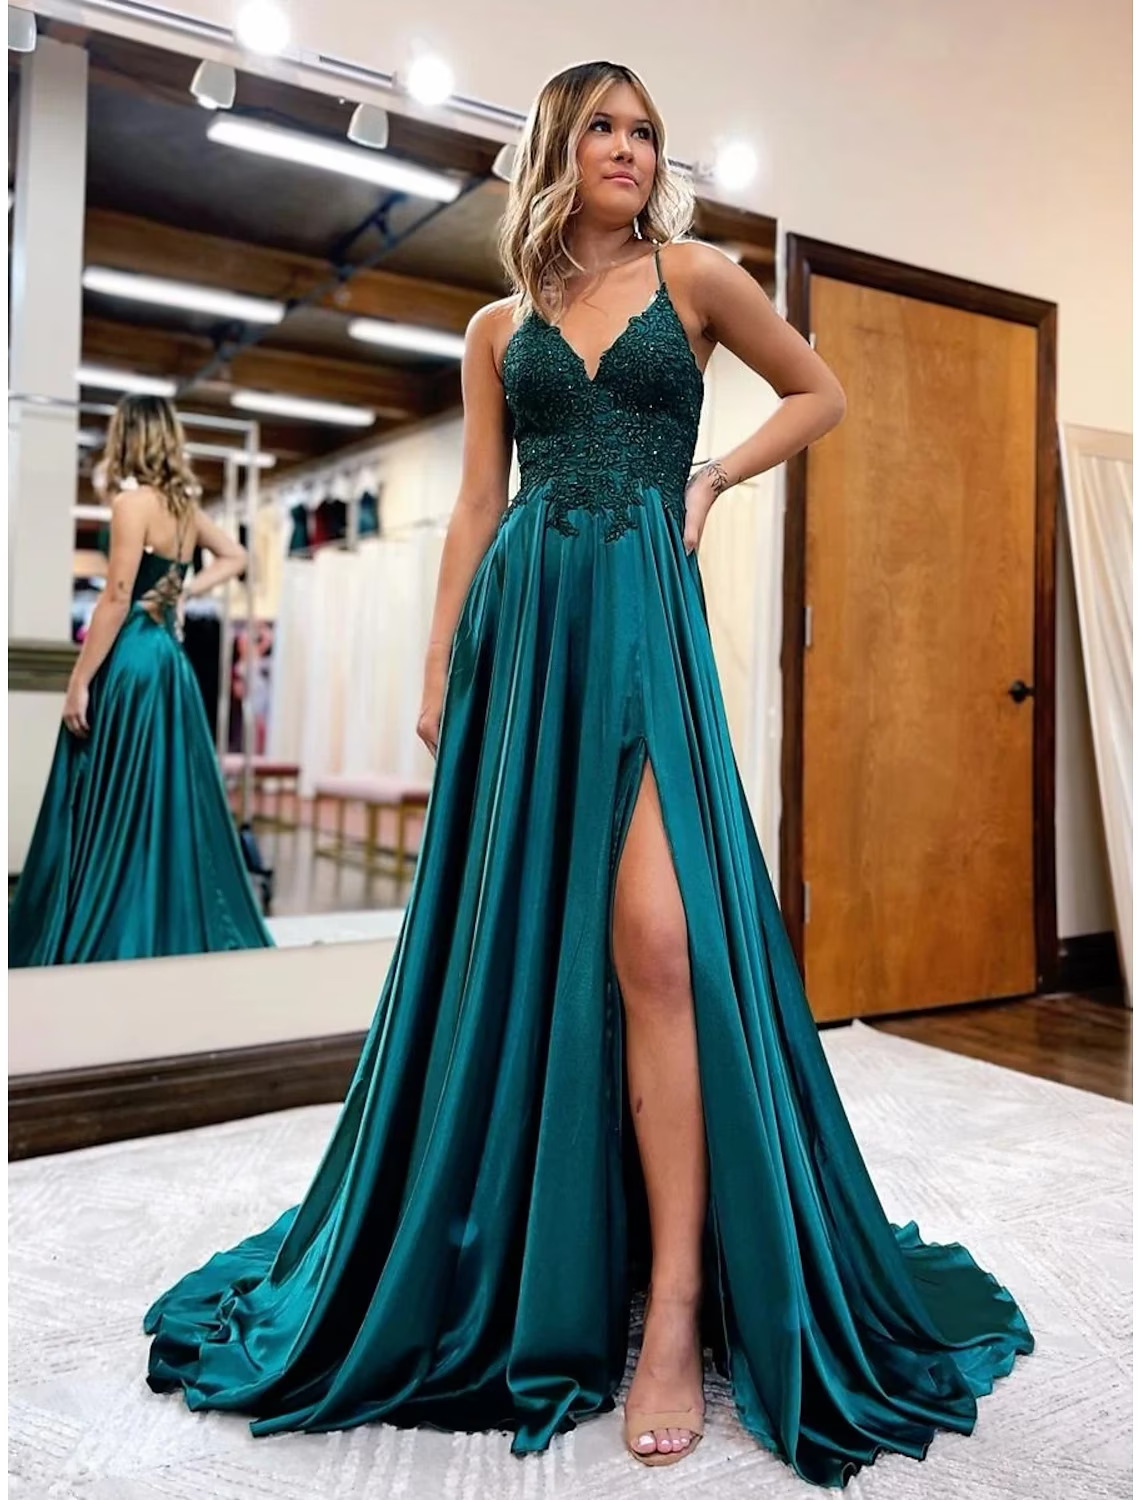 A-Line Prom Dresses Empire Dress Formal Court Train Sleeveless V Neck Satin Backless with Beading Appliques